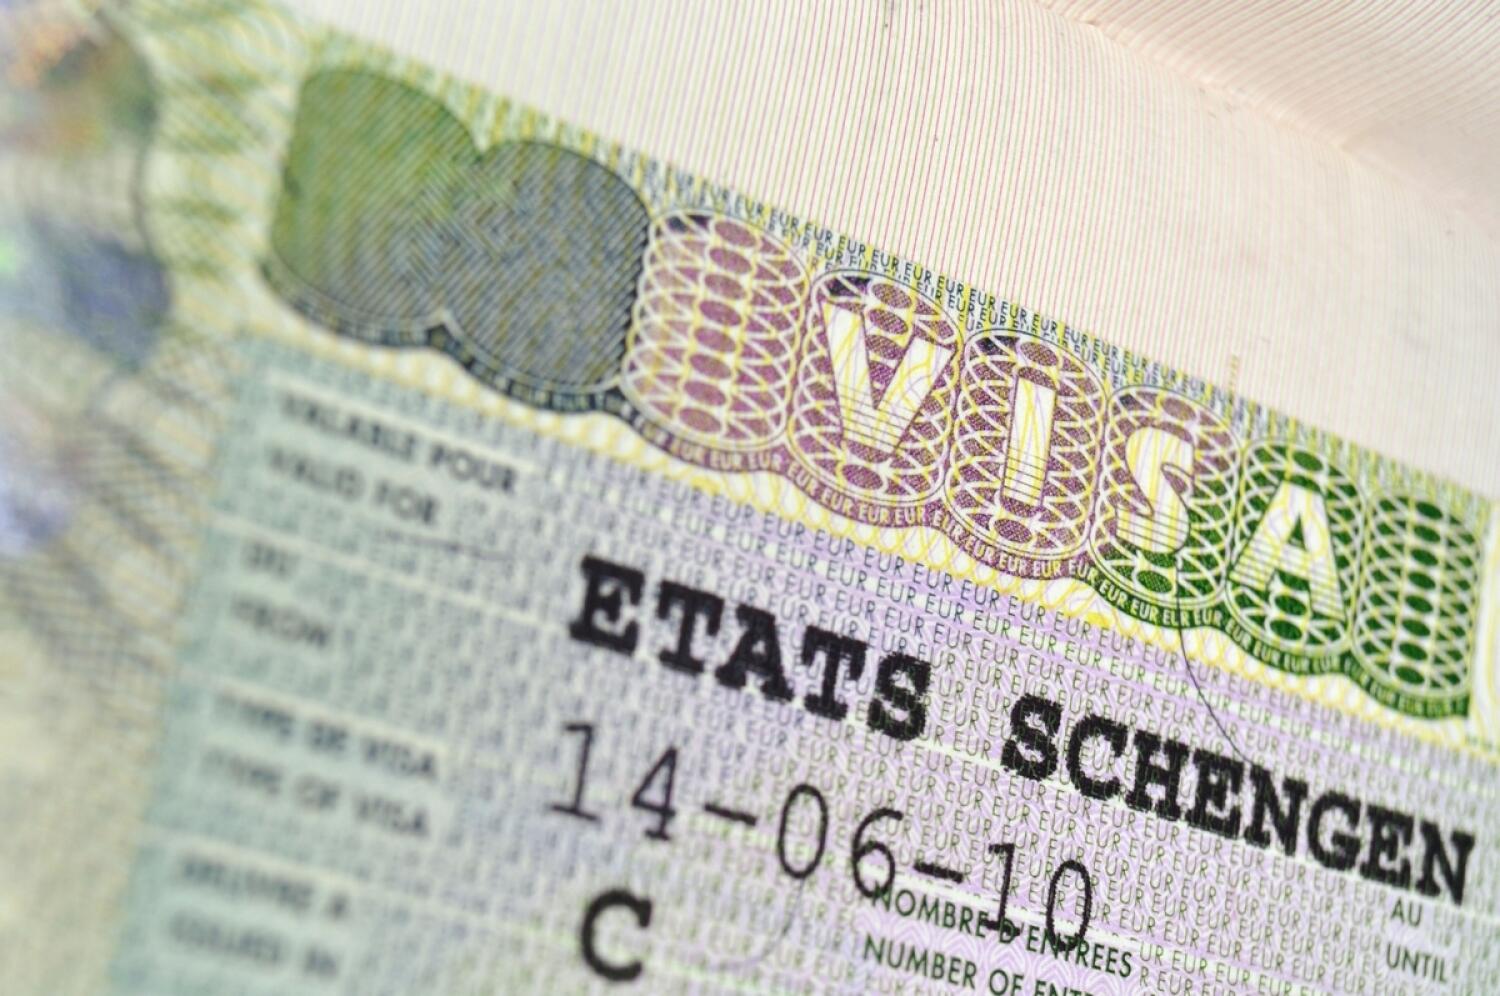 UAE Residents to Apply for Schengen Visas Online, Eliminating the Need for Appointments and Queues